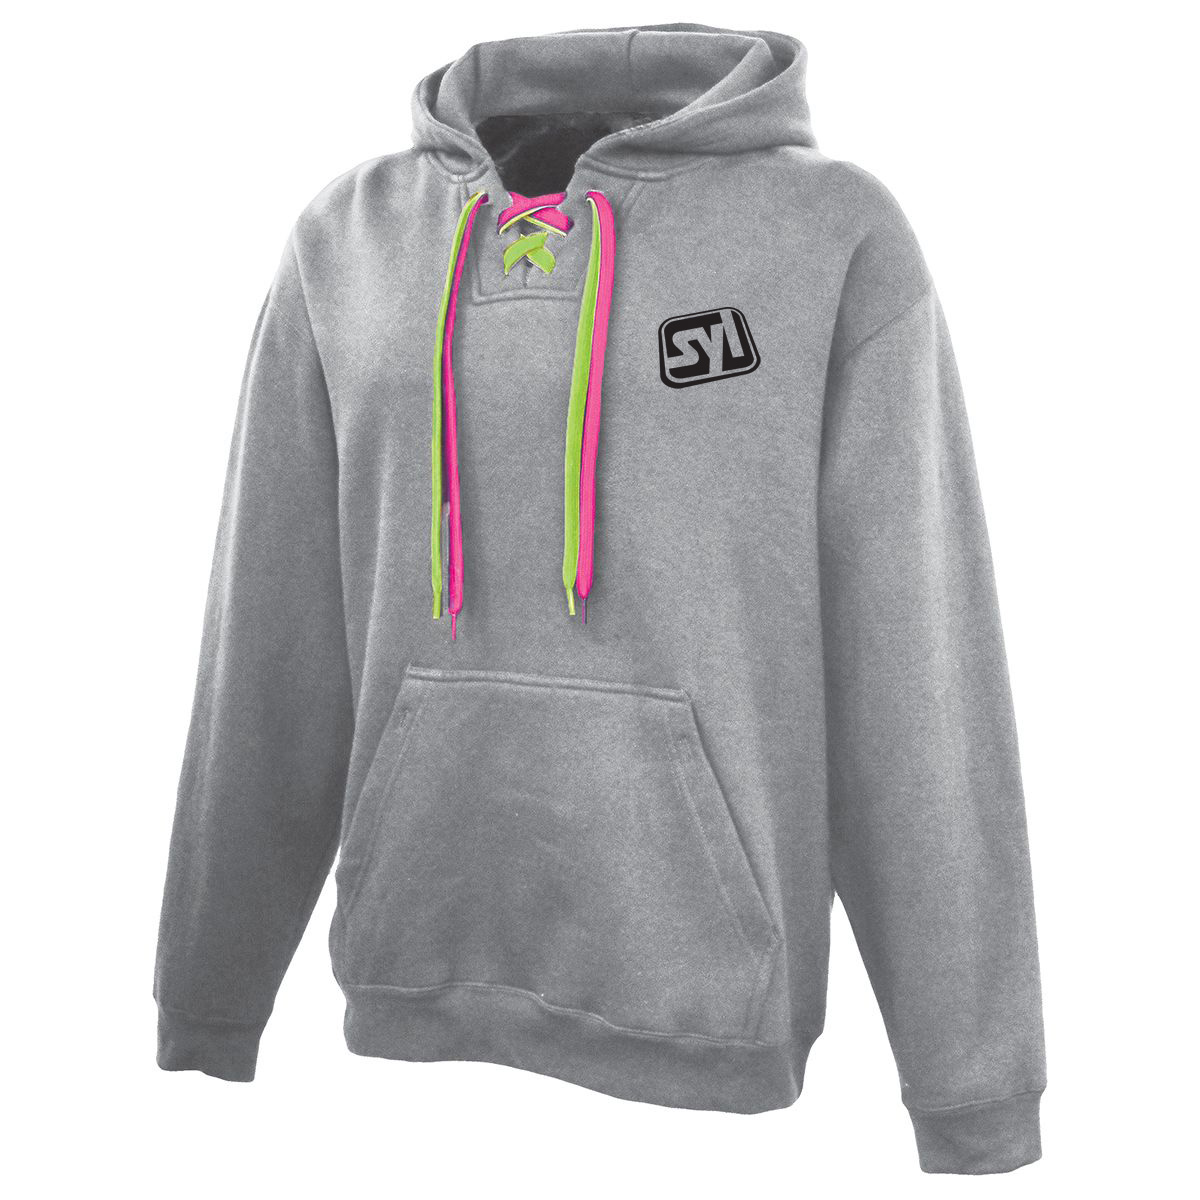 Faceoff Hoodie - Show Your Logo